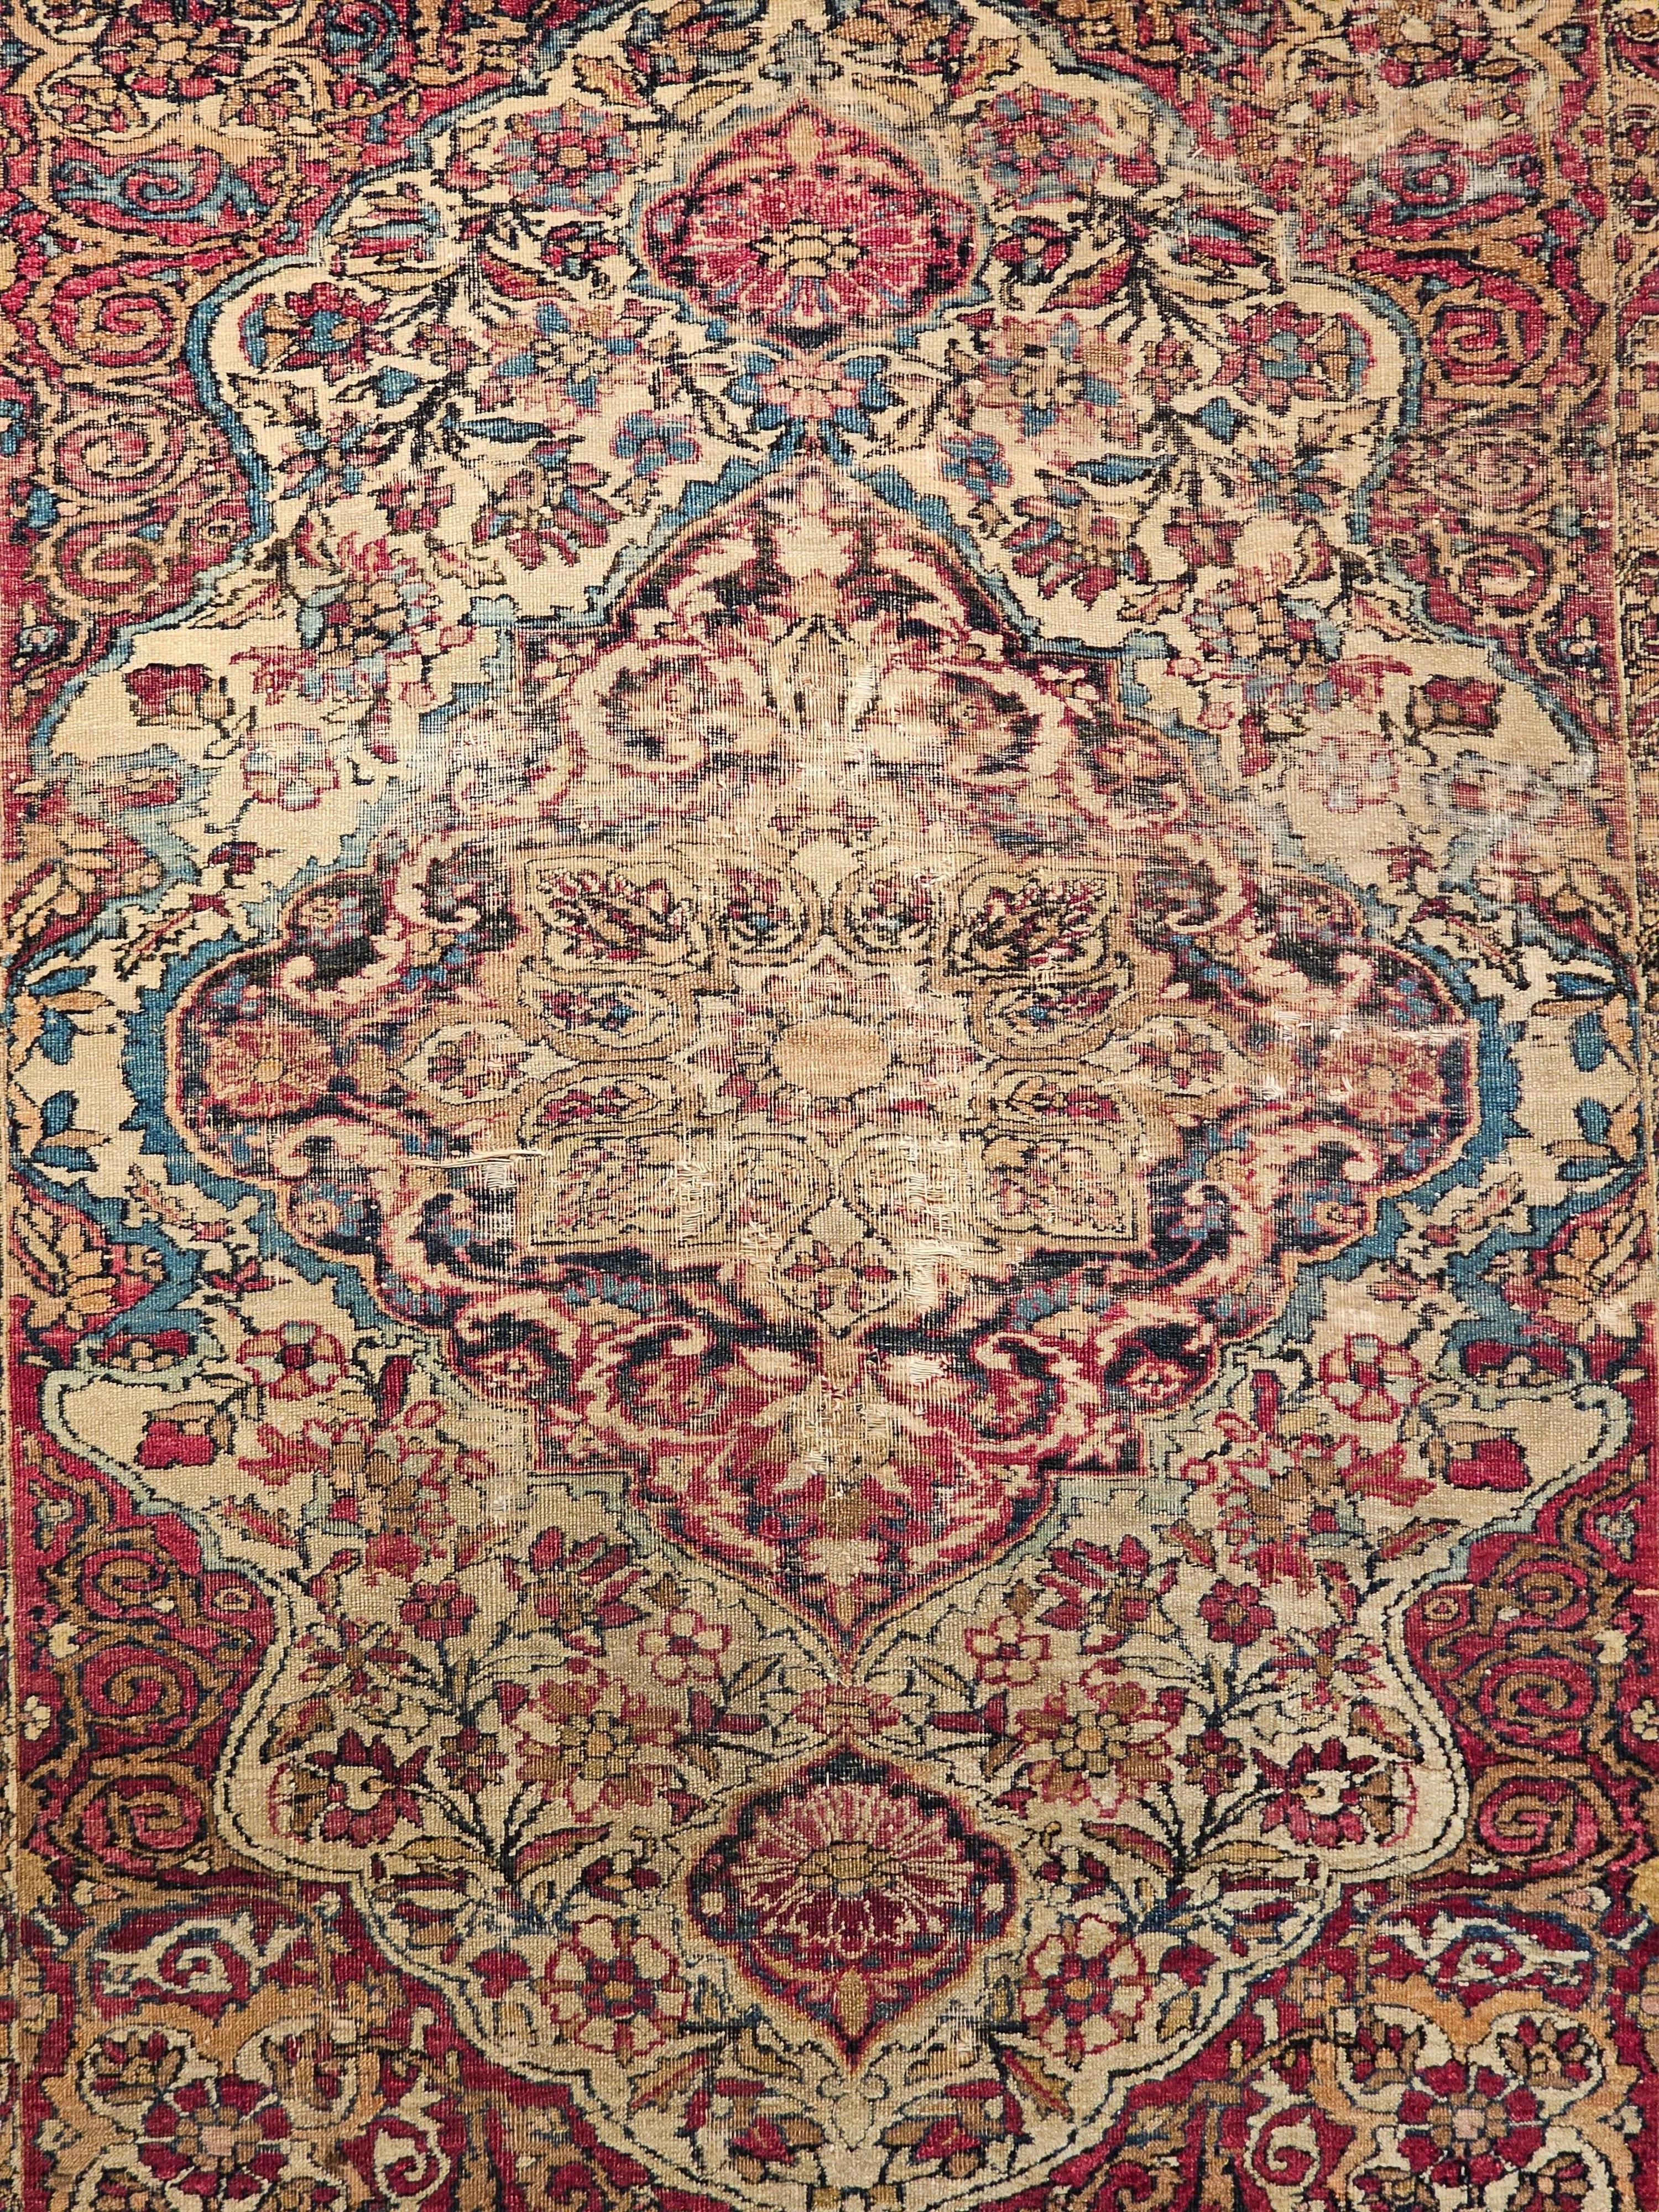 Mid 19th century Persian Kerman Lavar area rug in floral design with ivory, red, and French blue colors.  The rug has a gorgeous design and wonderful color combination.  The rug has a central medallion in navy blue and caramel with floral designs in